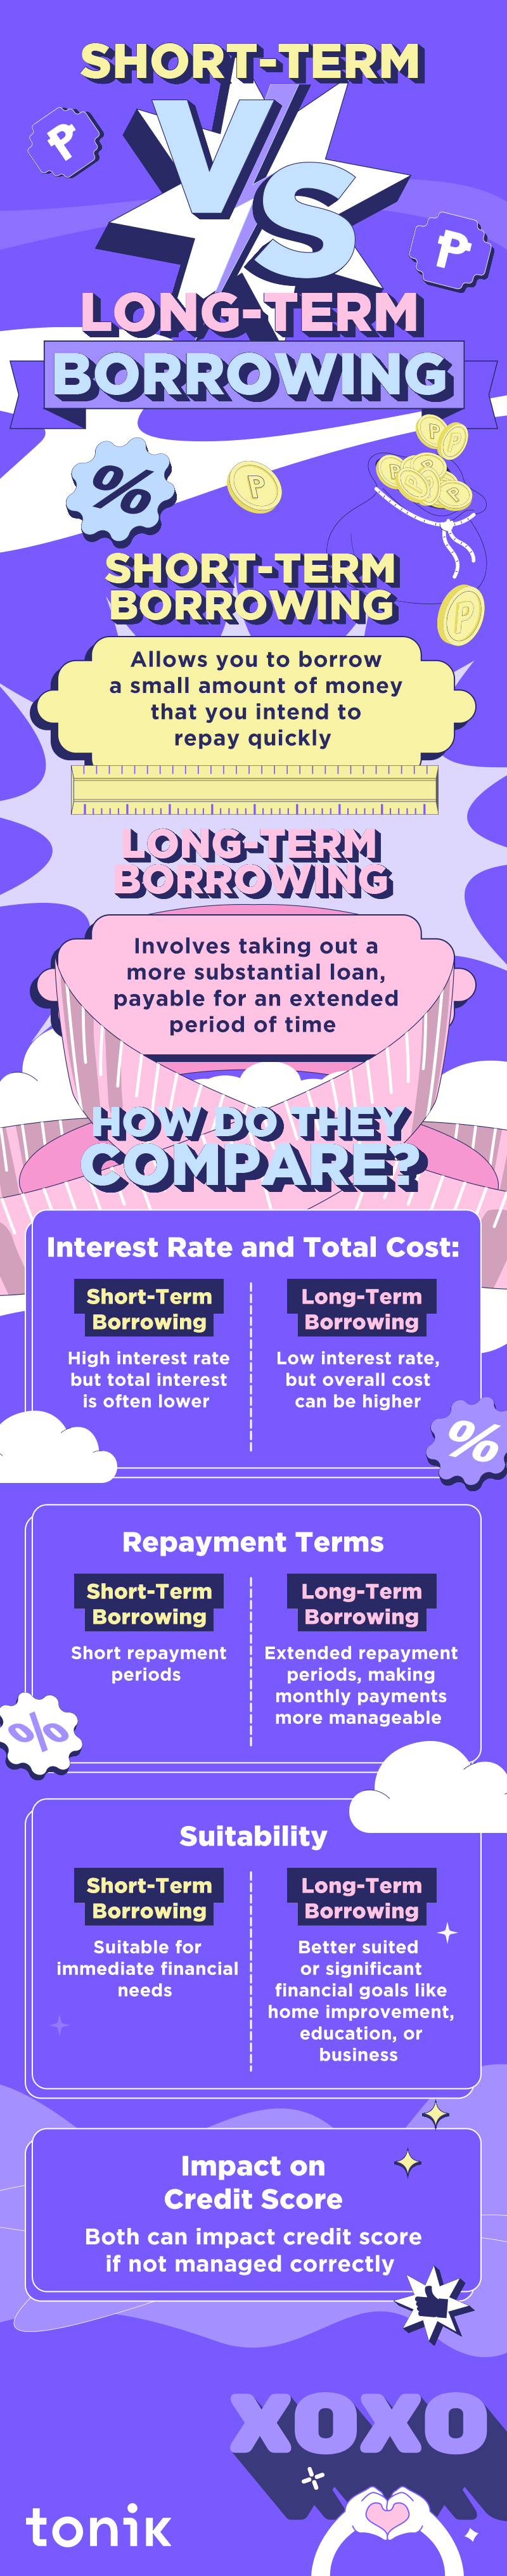 infographic that compares short-term and long-term borrowing